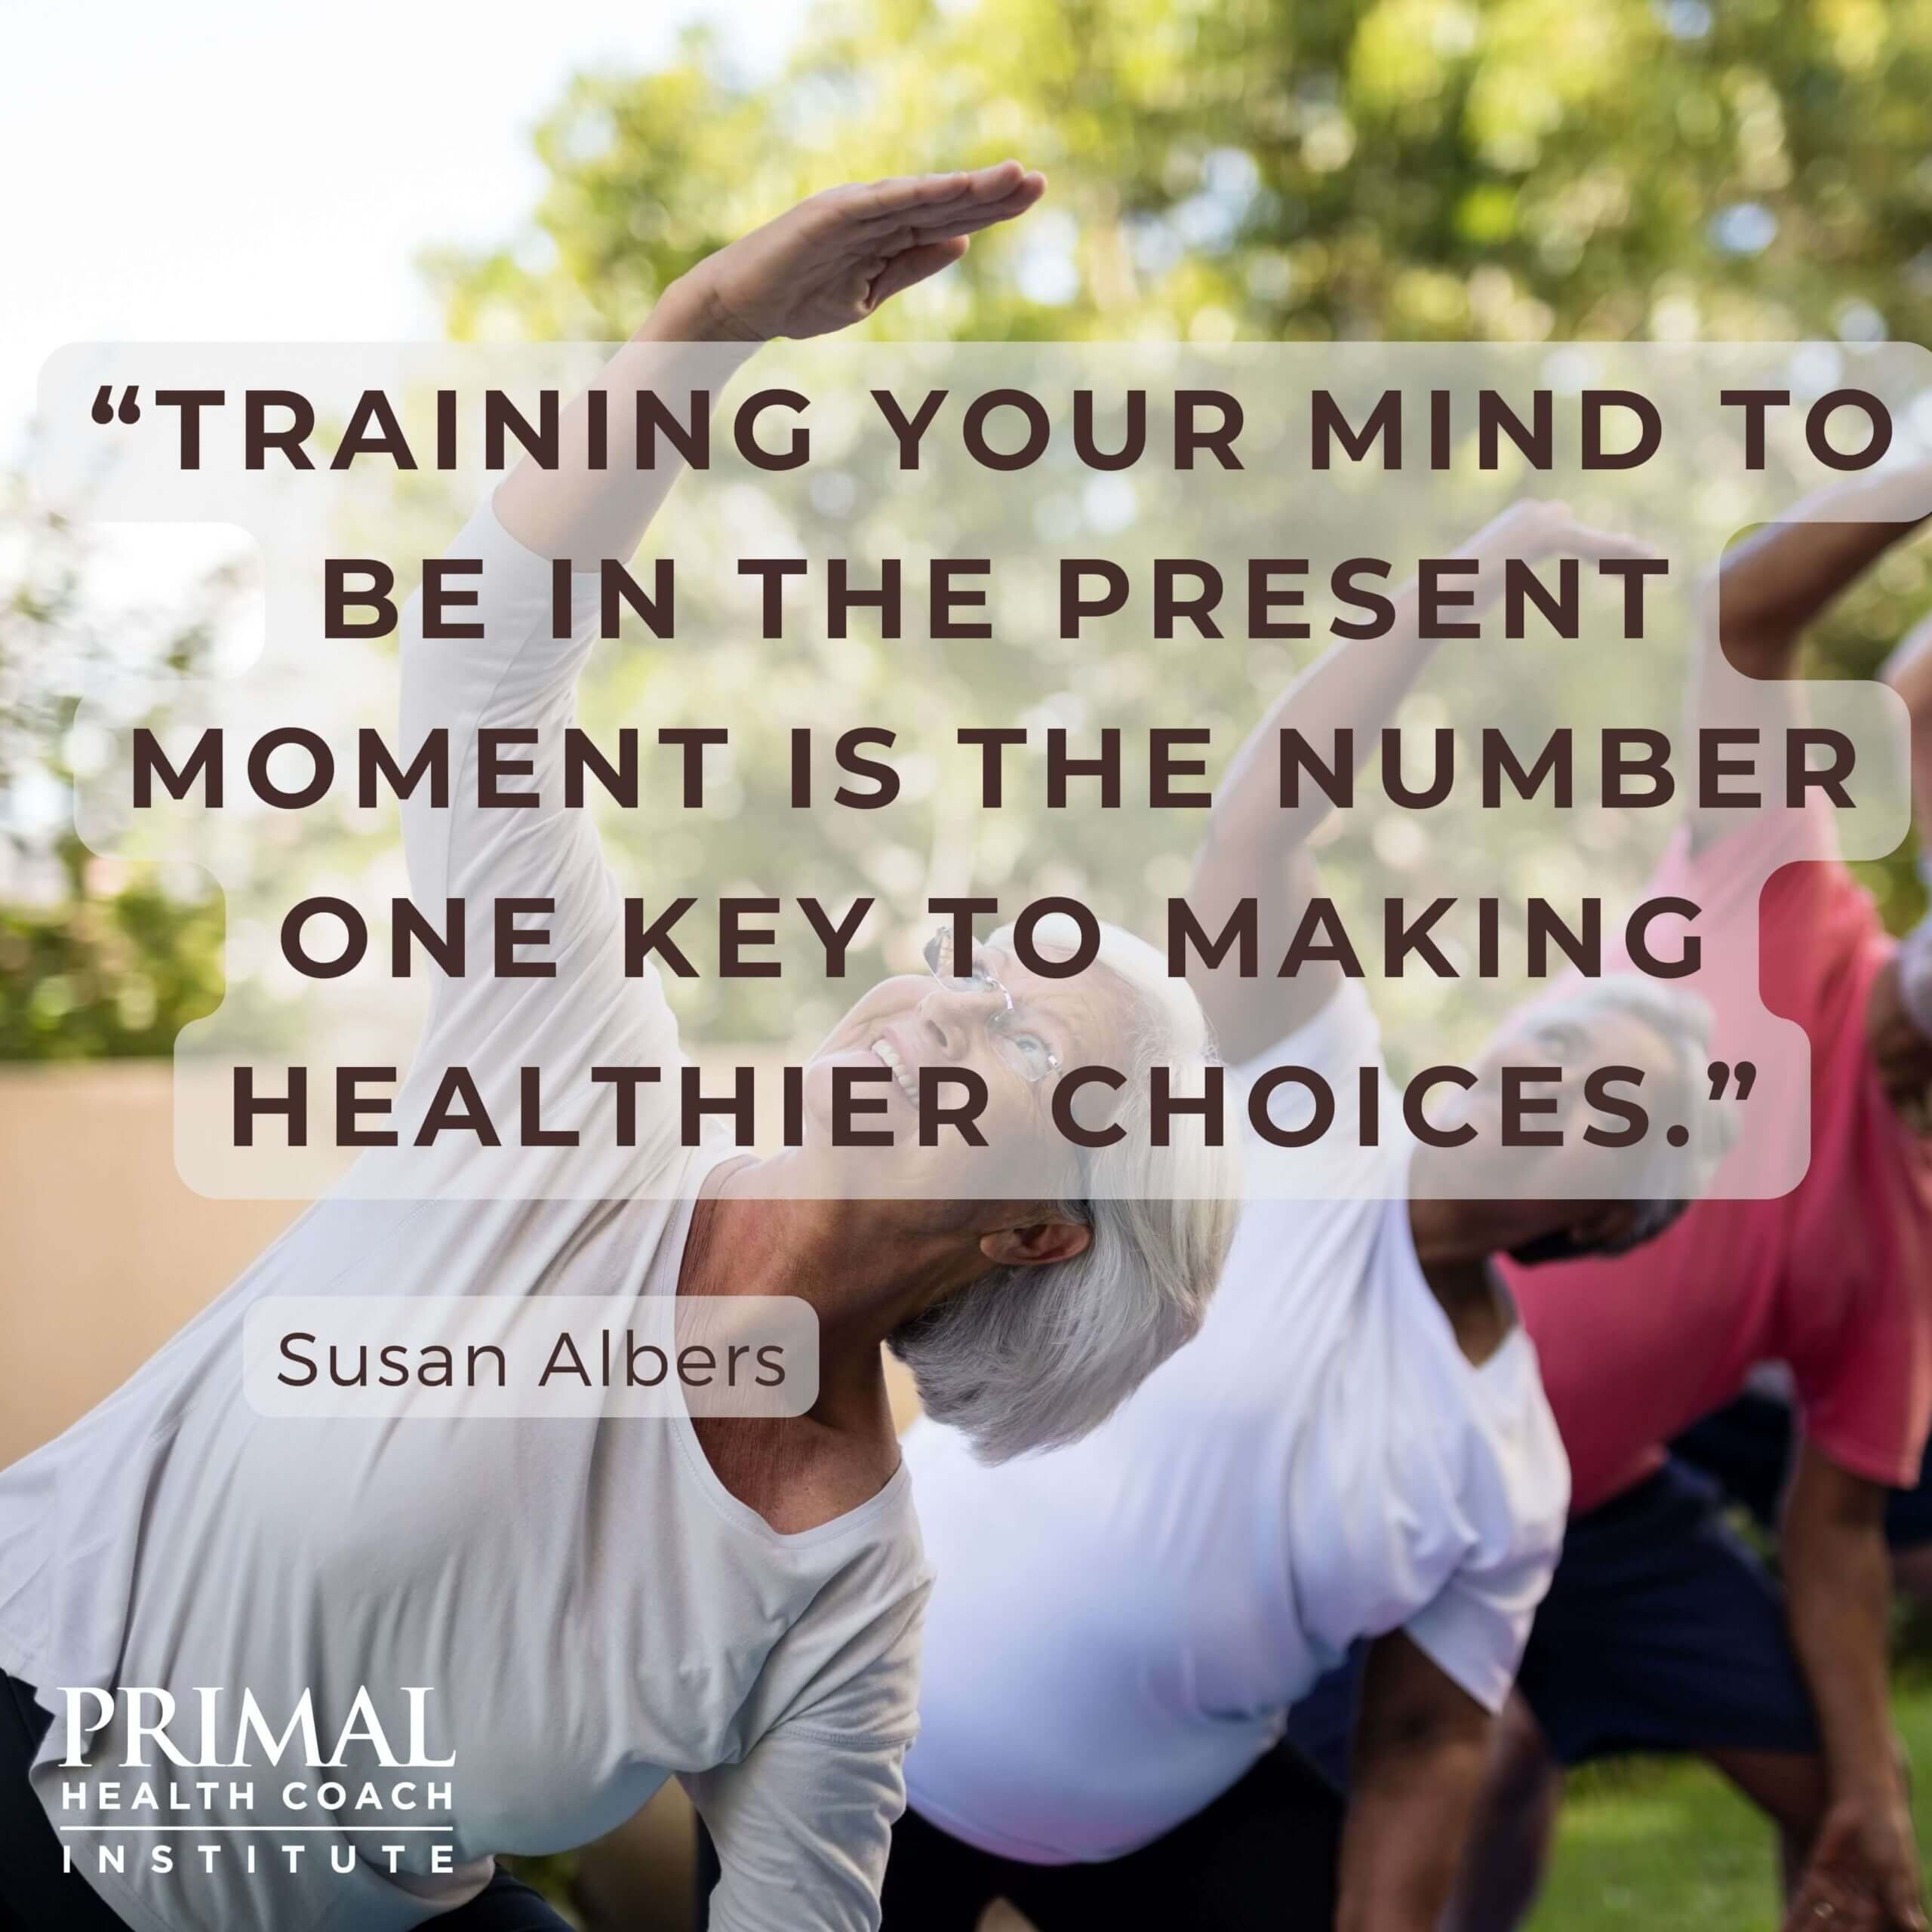 “Training your mind to be in the present moment is the number one key to making healthier choices.” - Susan Albers